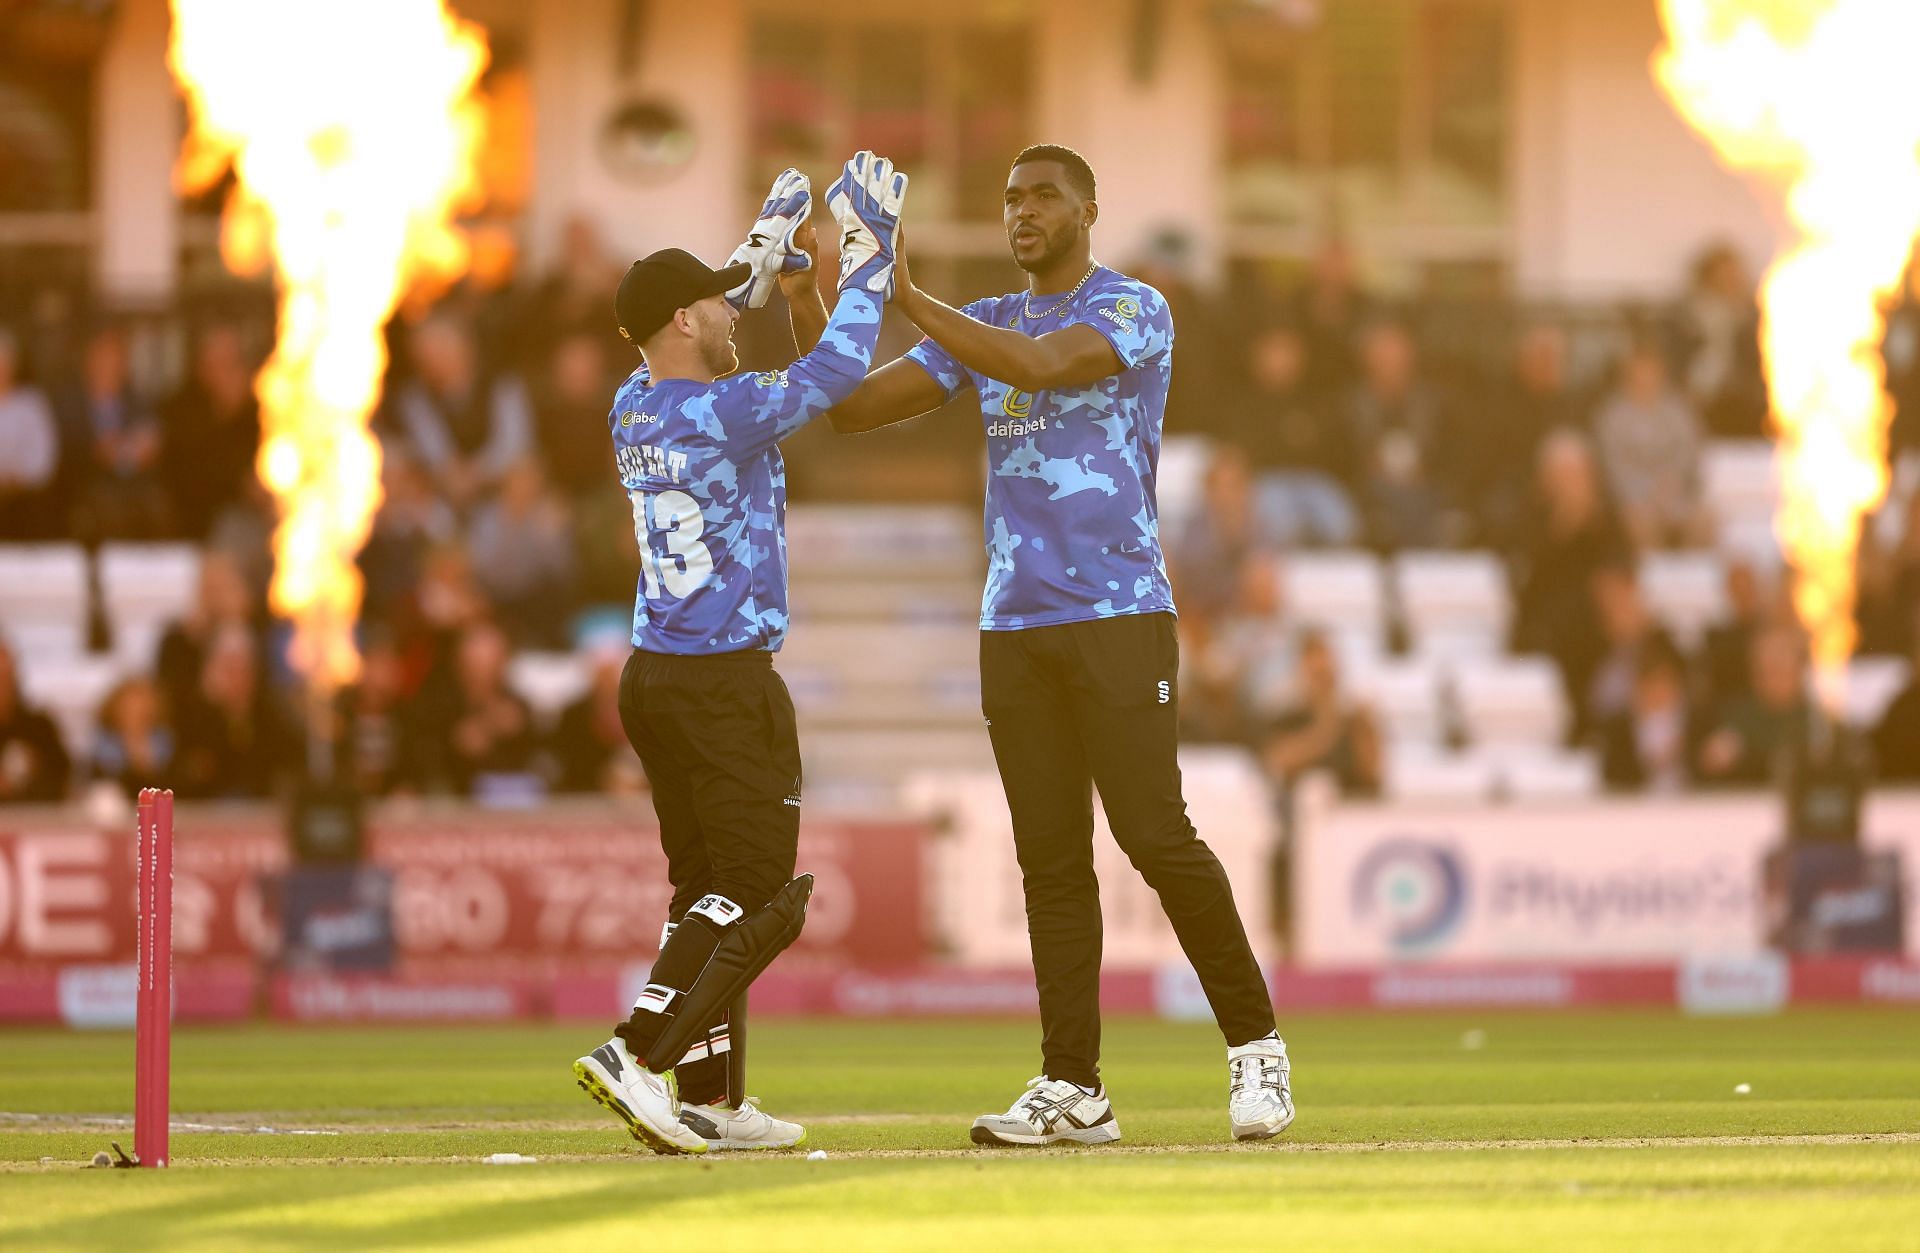 Sussex Sharks v Gloucestershire - Vitality T20 Blast (Image Courtesy: Getty Images)